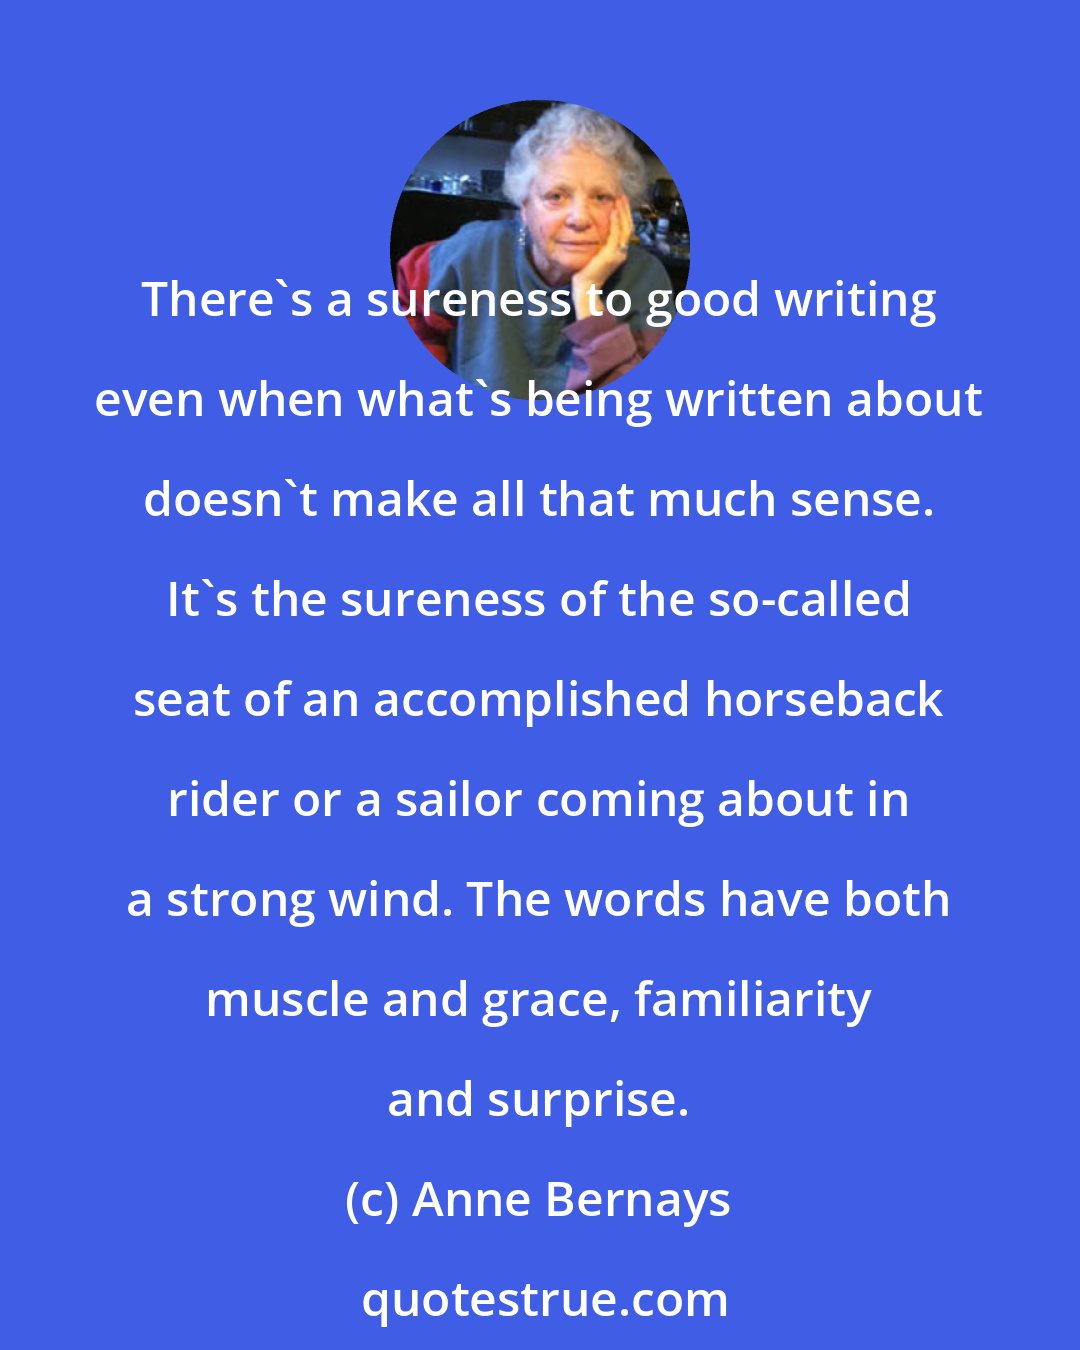 Anne Bernays: There's a sureness to good writing even when what's being written about doesn't make all that much sense. It's the sureness of the so-called seat of an accomplished horseback rider or a sailor coming about in a strong wind. The words have both muscle and grace, familiarity and surprise.